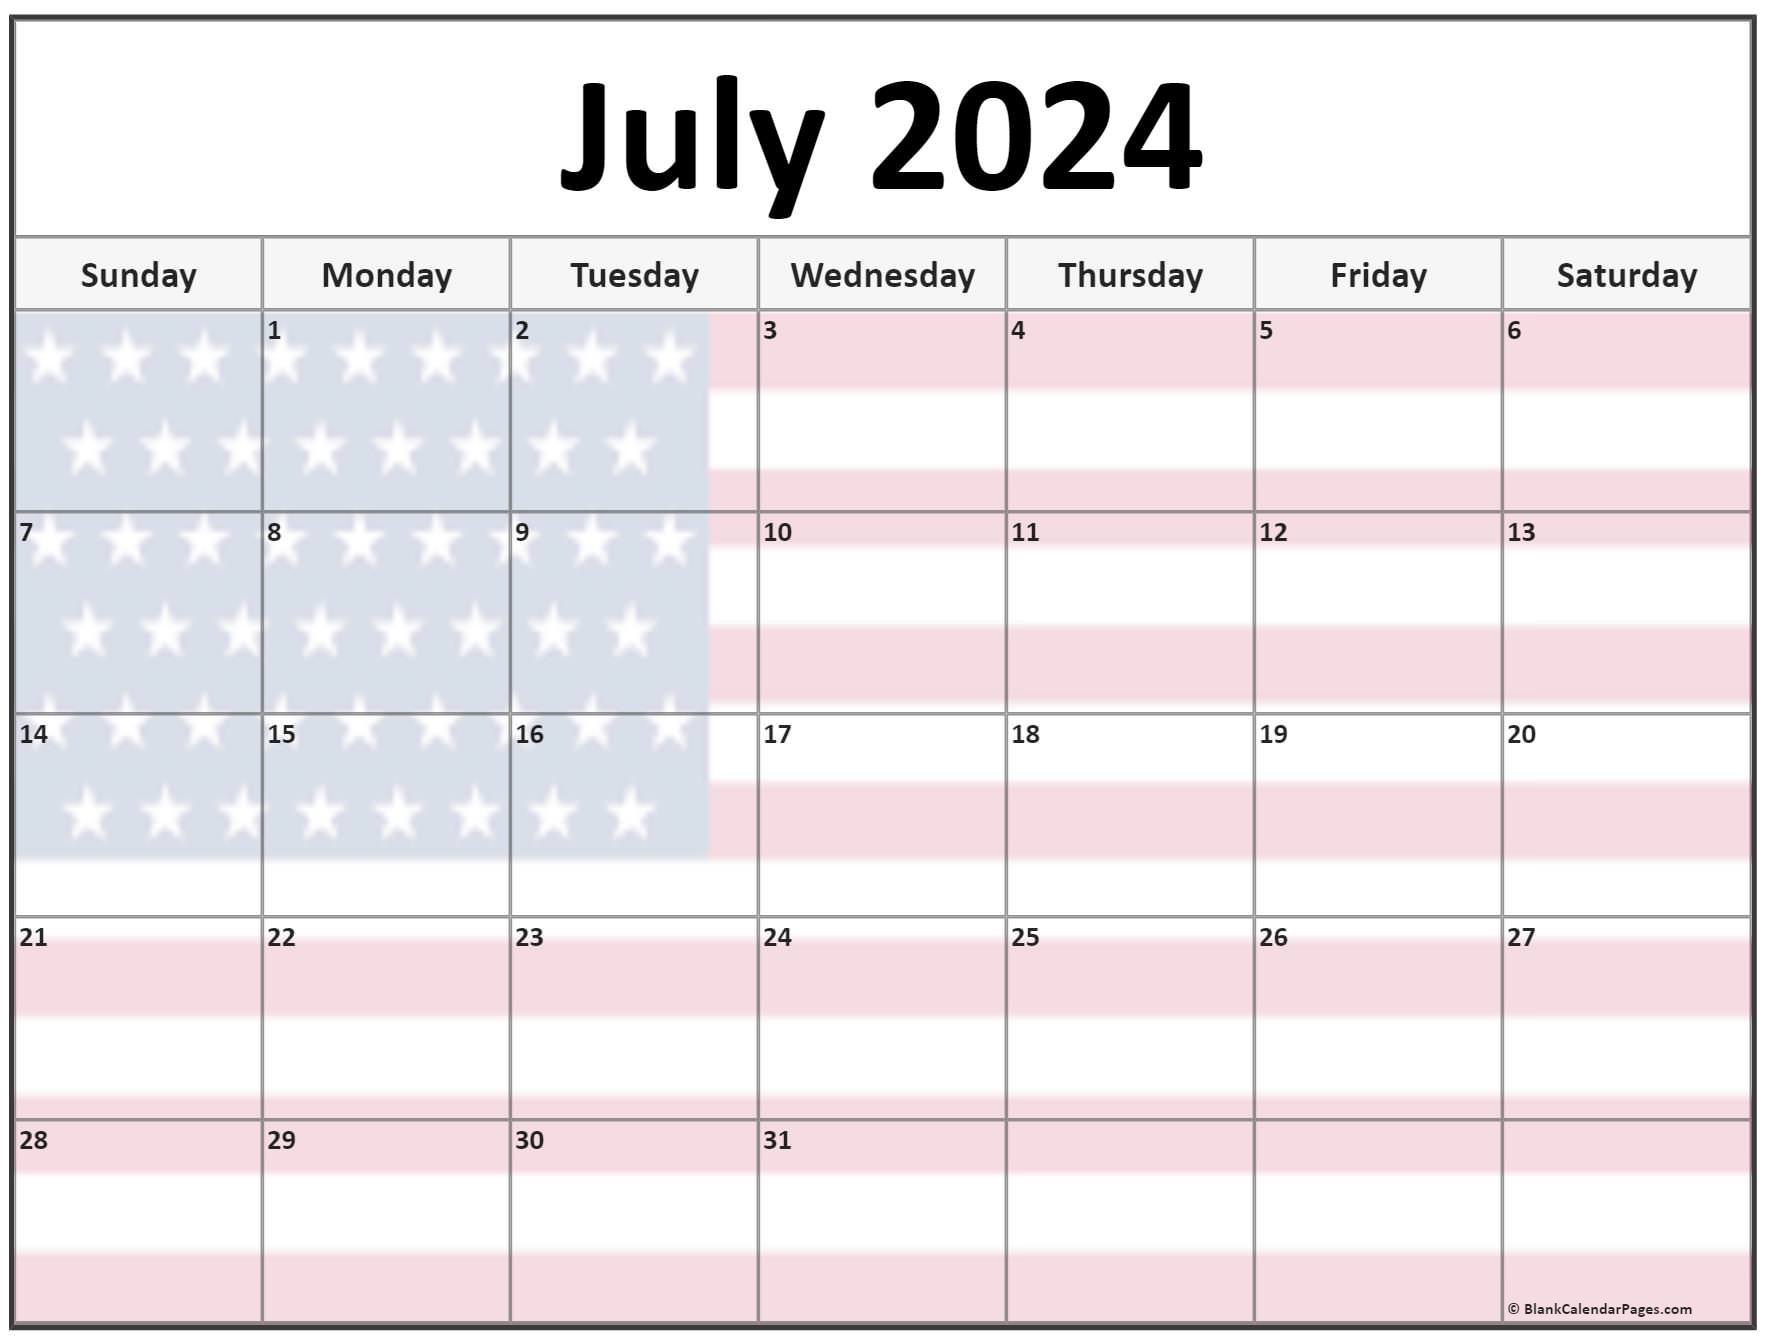 collection-of-july-2024-photo-calendars-with-image-filters